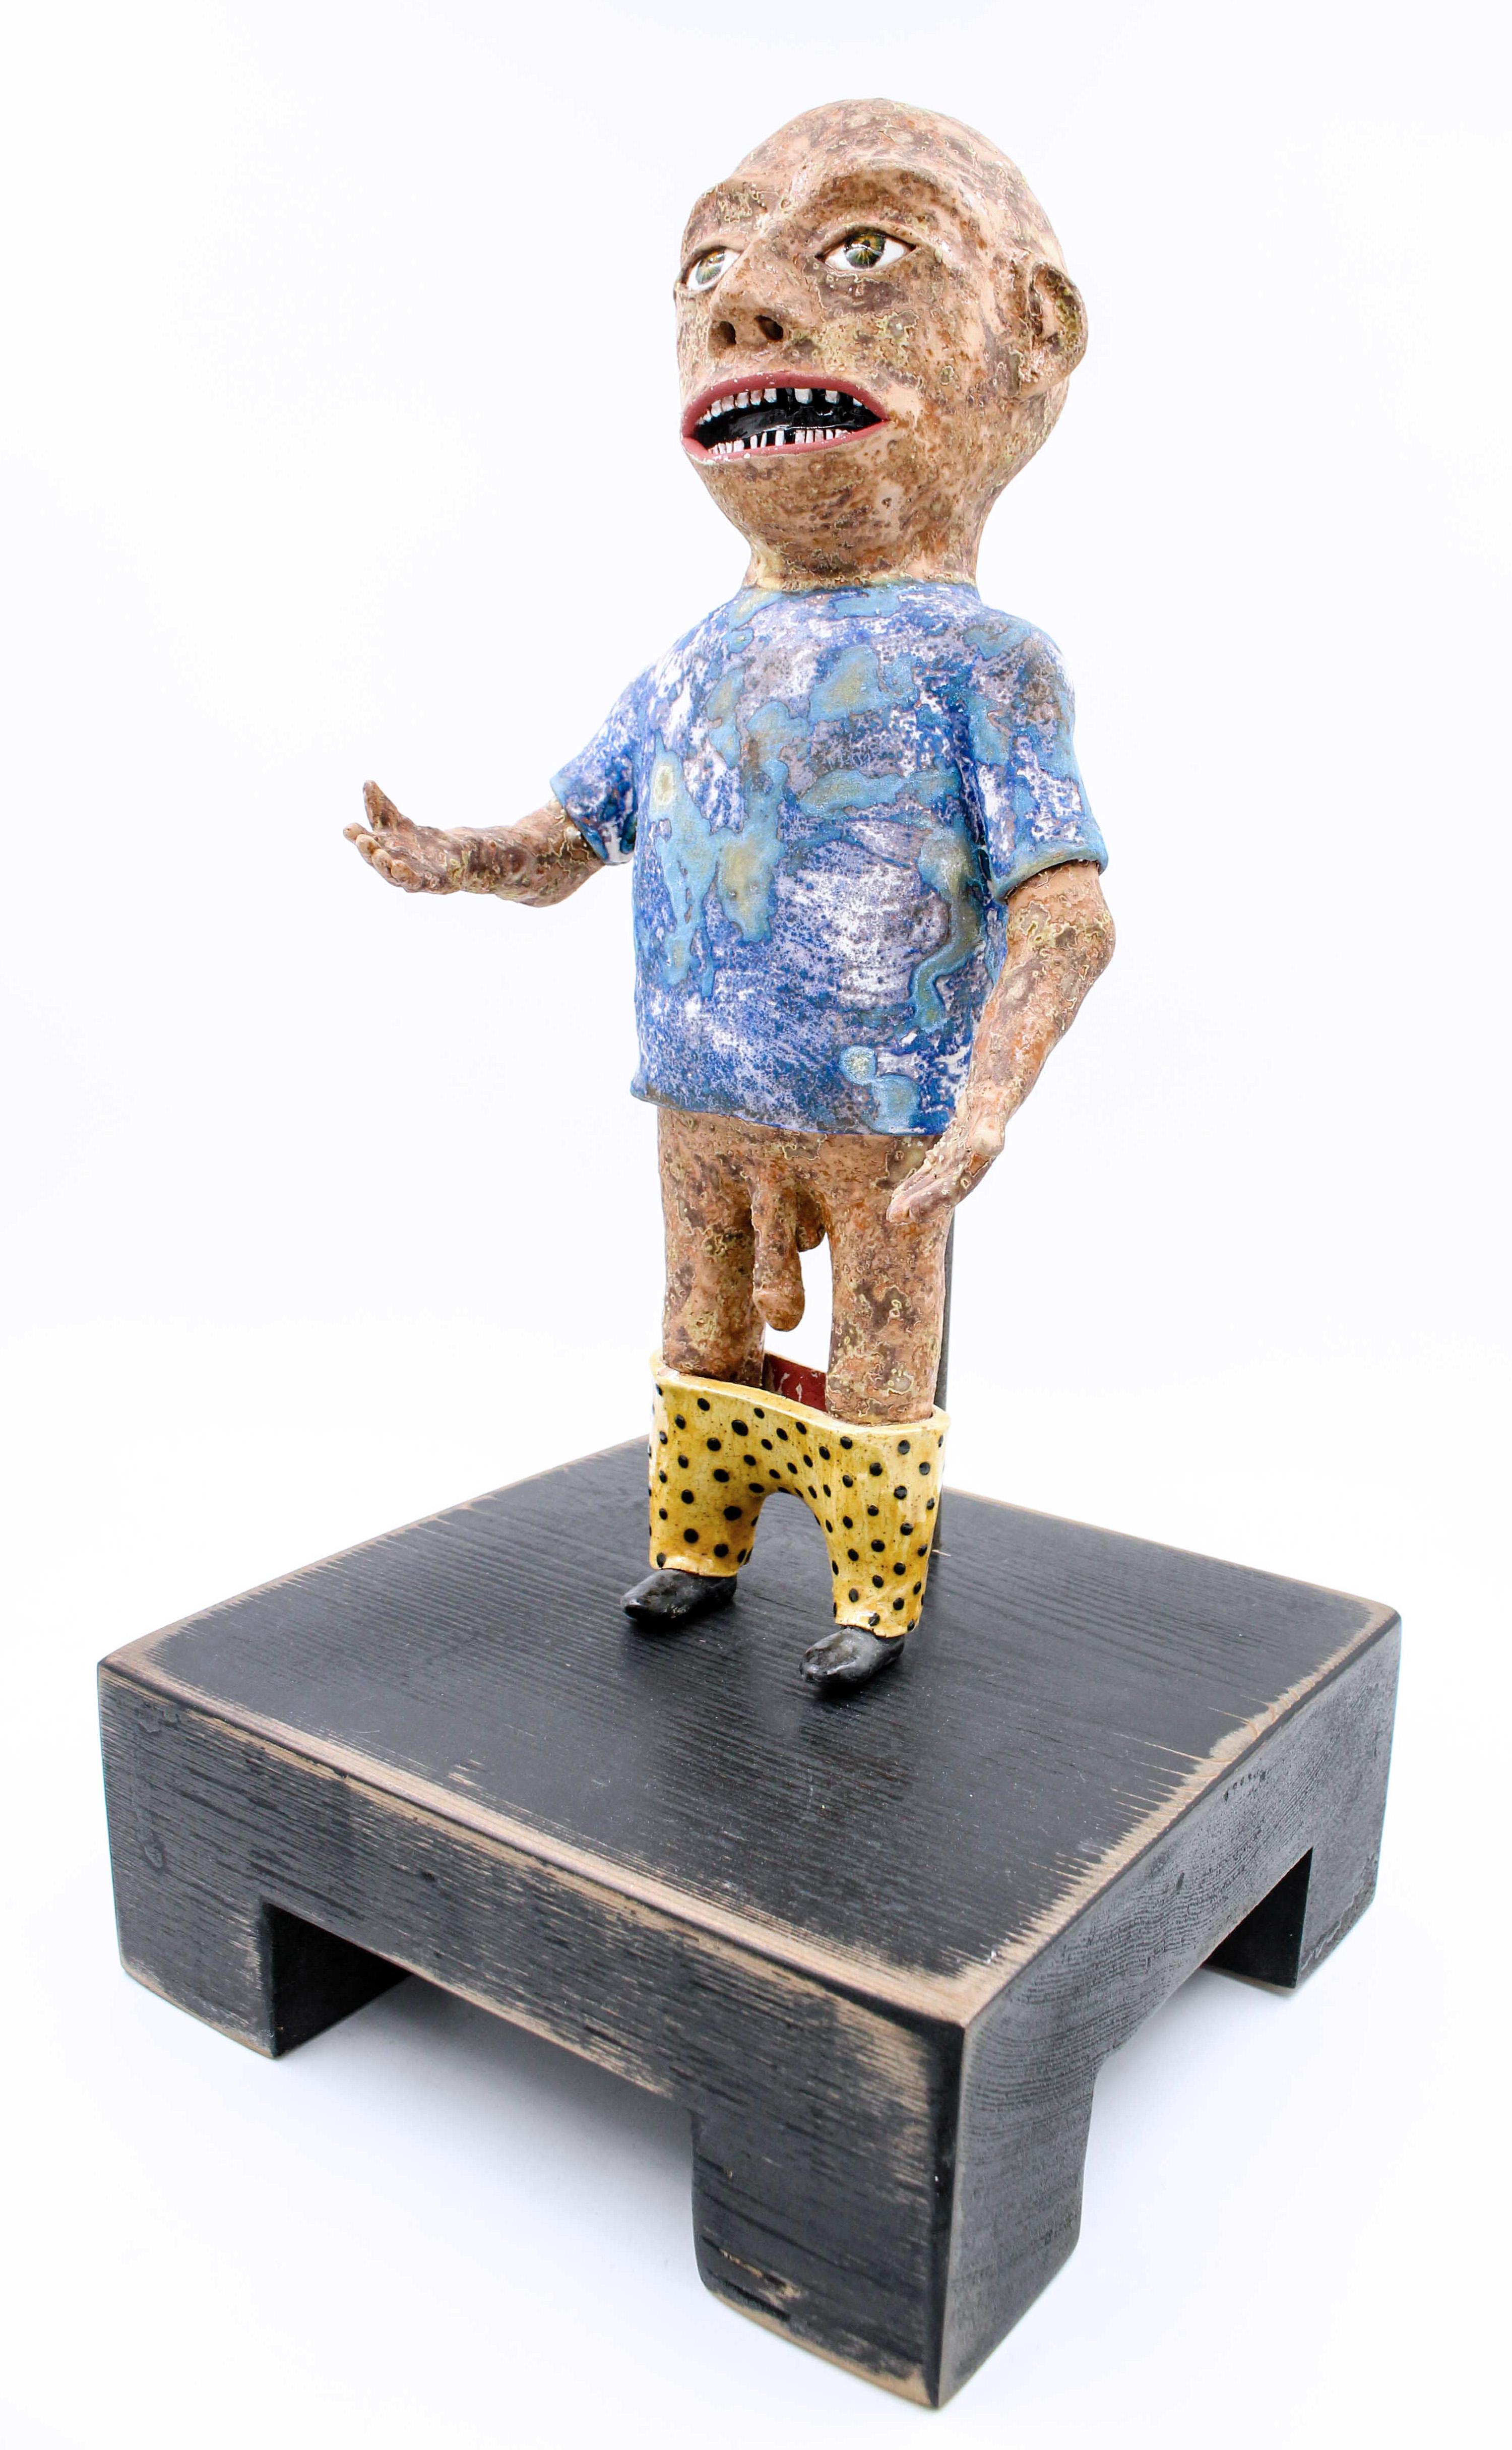 Caught with Pants Down, 2018, ceramic - Sculpture by Wesley Anderegg